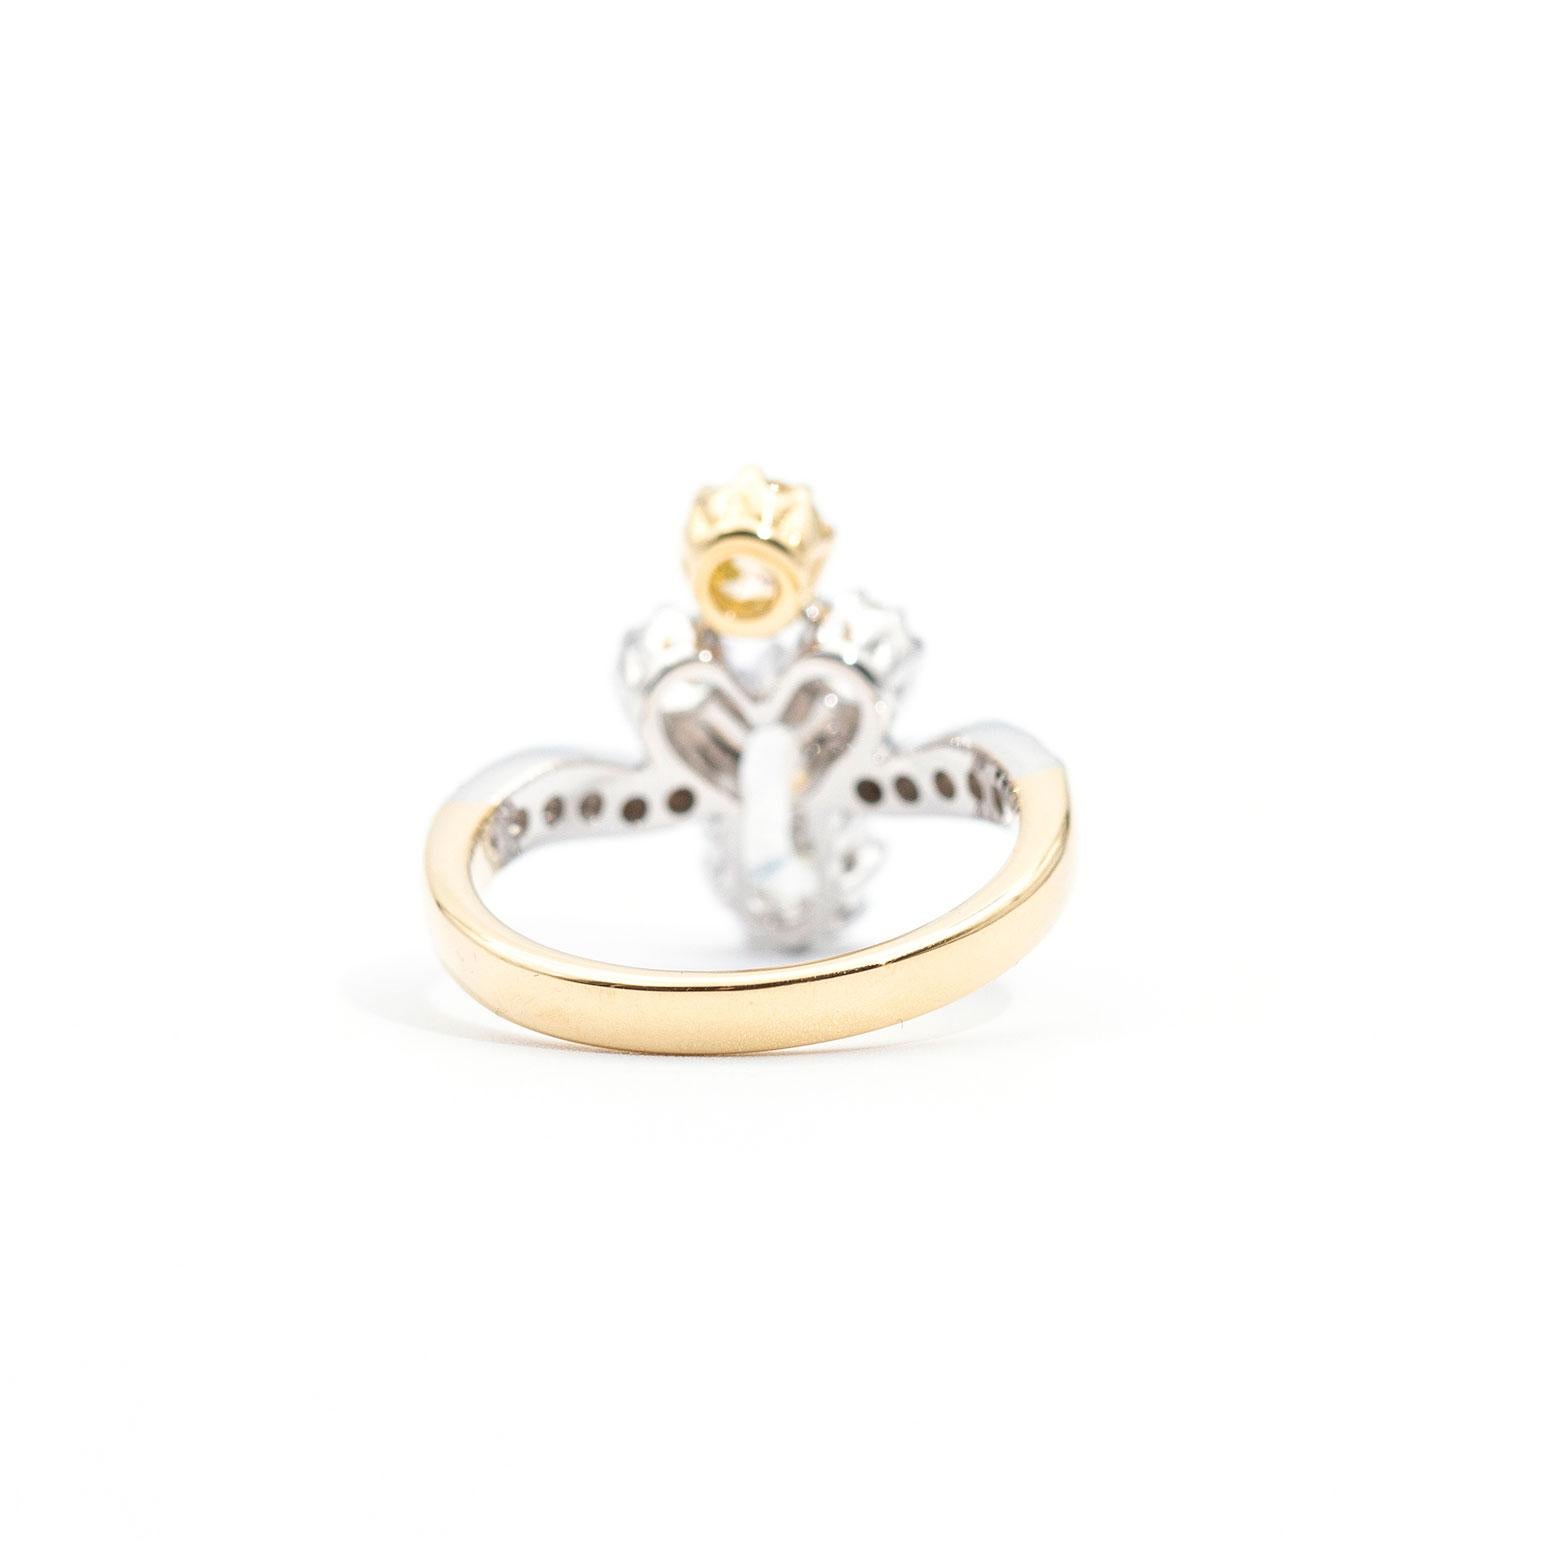 Certified 0.70 Carat Pear and Fancy Yellow Diamond Vintage 18 Carat Gold Ring 1